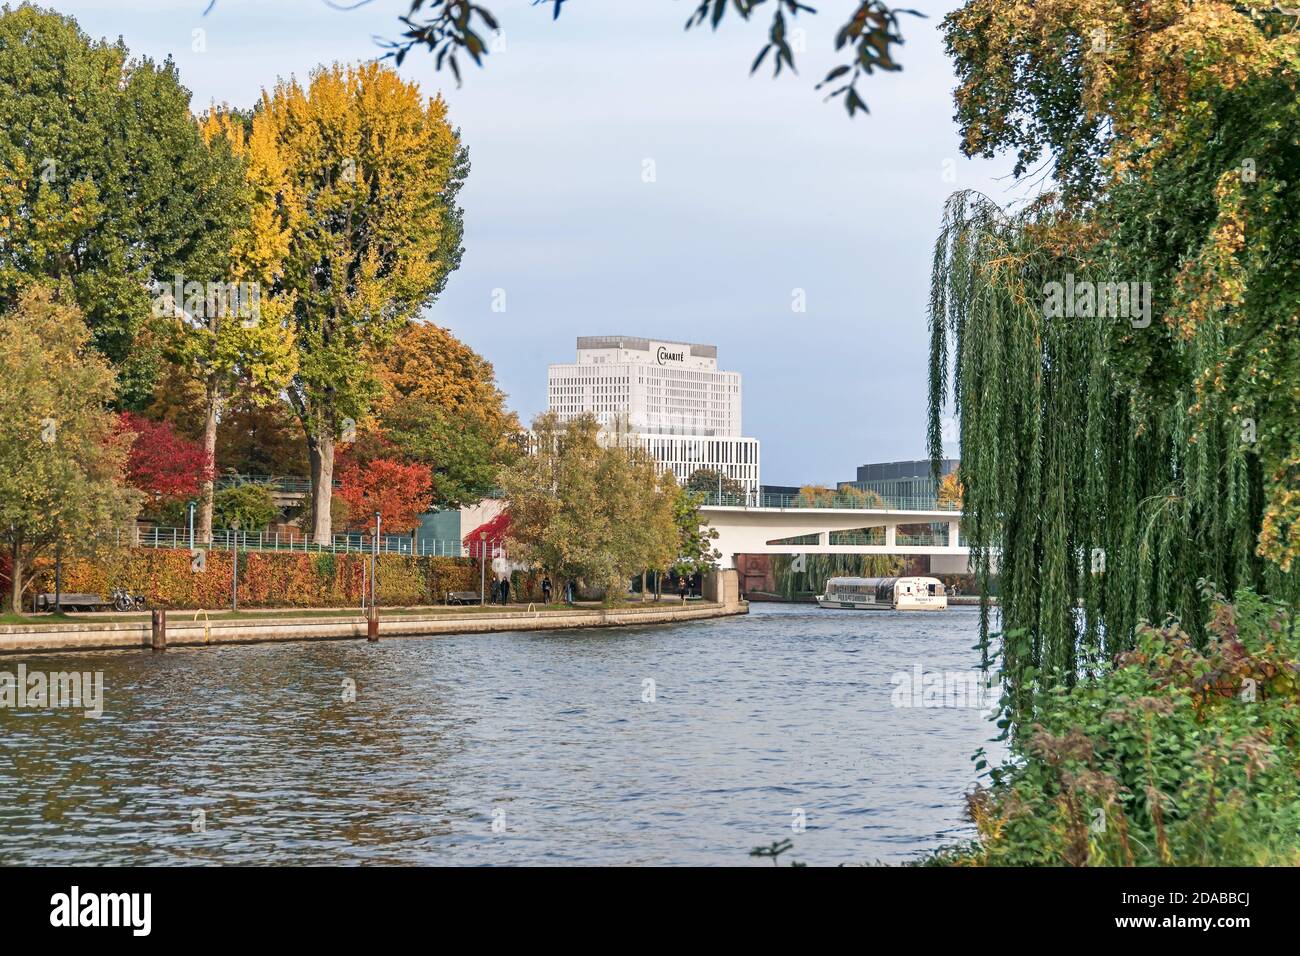 Berlin, Germany - October 20, 2020: Banks of the river Spree lined with autumn coloured trees and tourist boat, the building of the Charite, Europe's Stock Photo